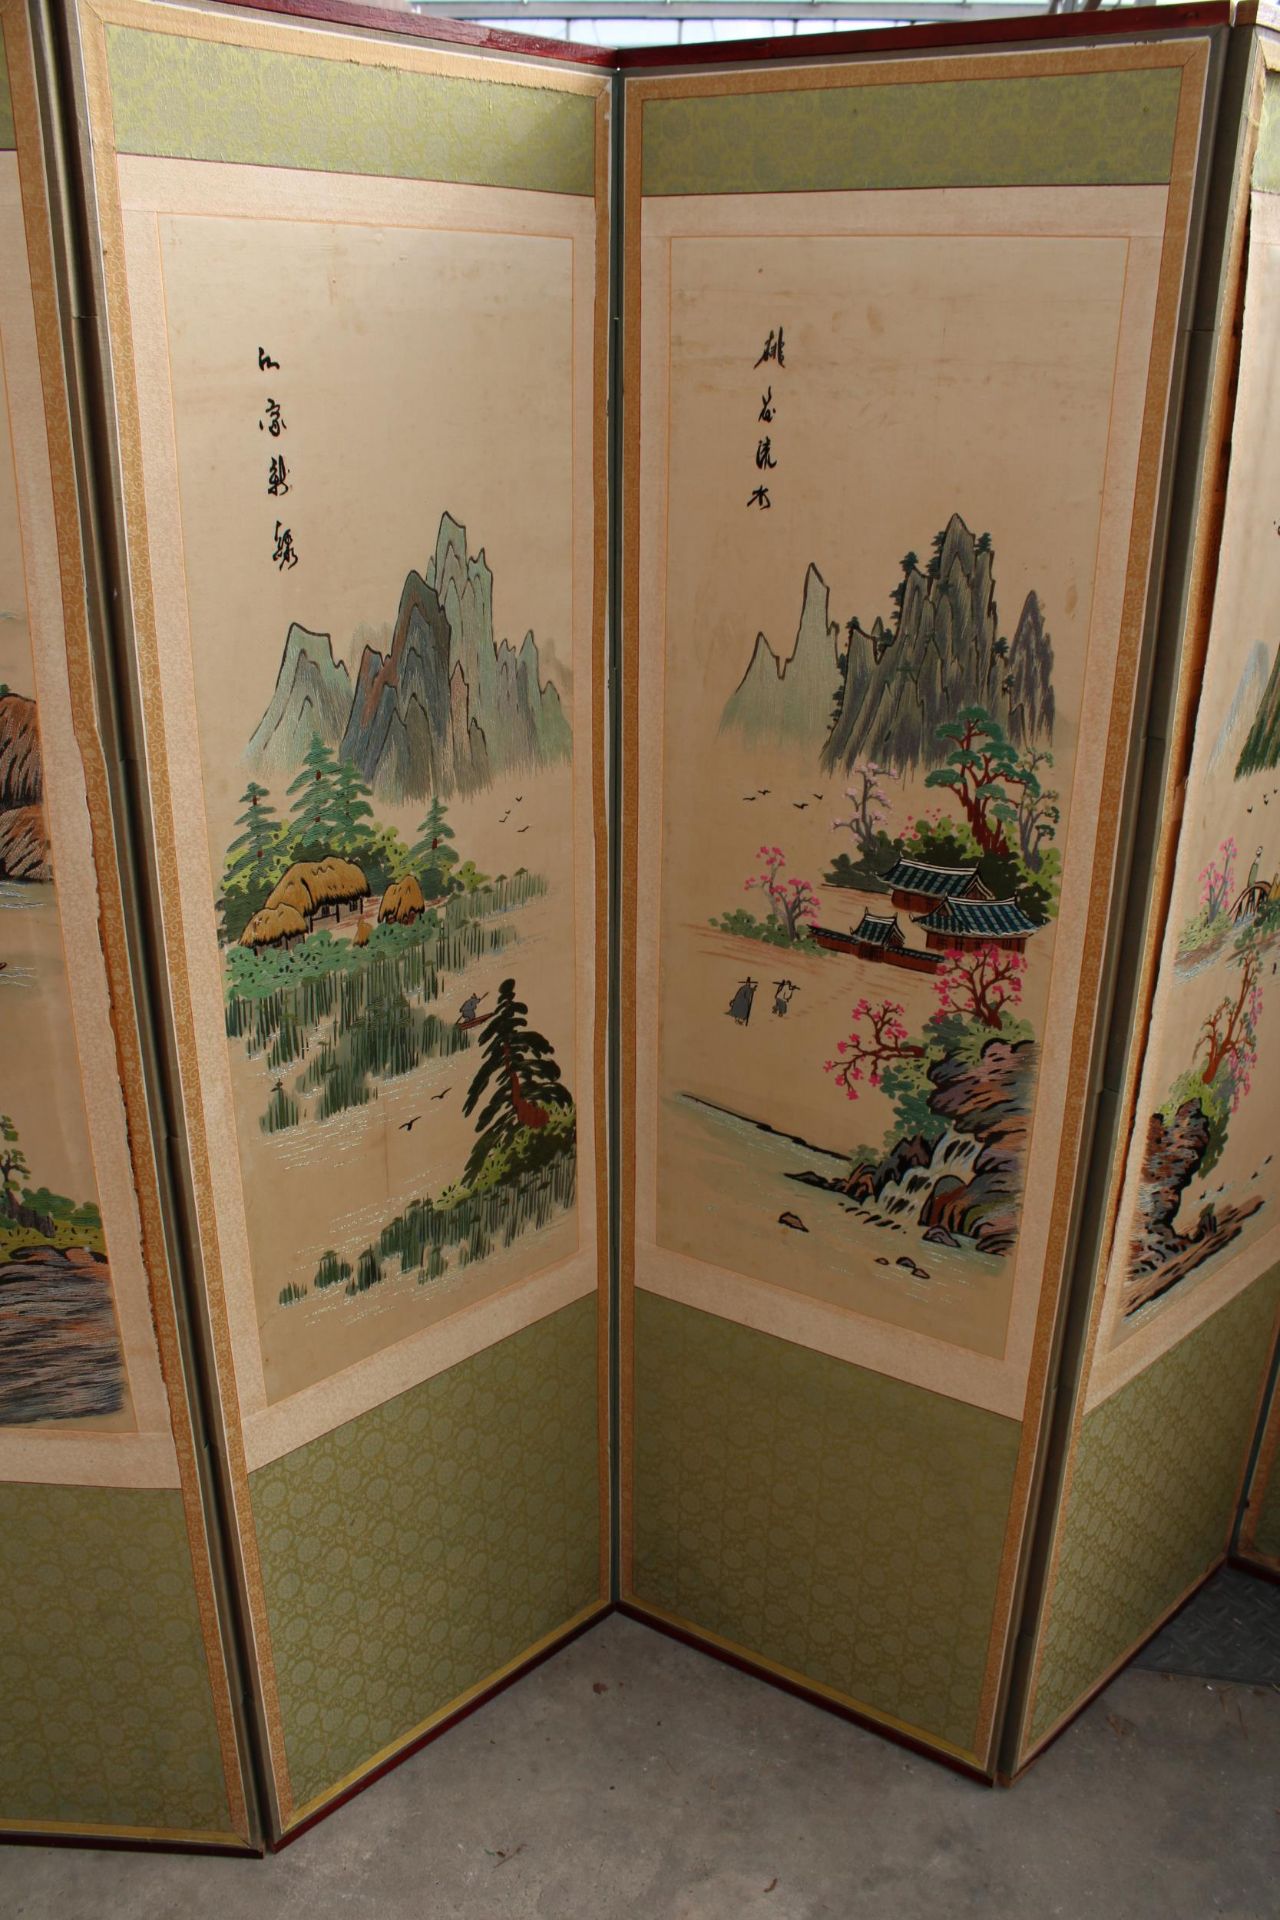 AN ORIENTAL SIX DIVISION SCREEN WITH TAPESTRY AND SILK MOUNTAIN SCENES EACH SECTION IS 60" X 18" - Image 3 of 8